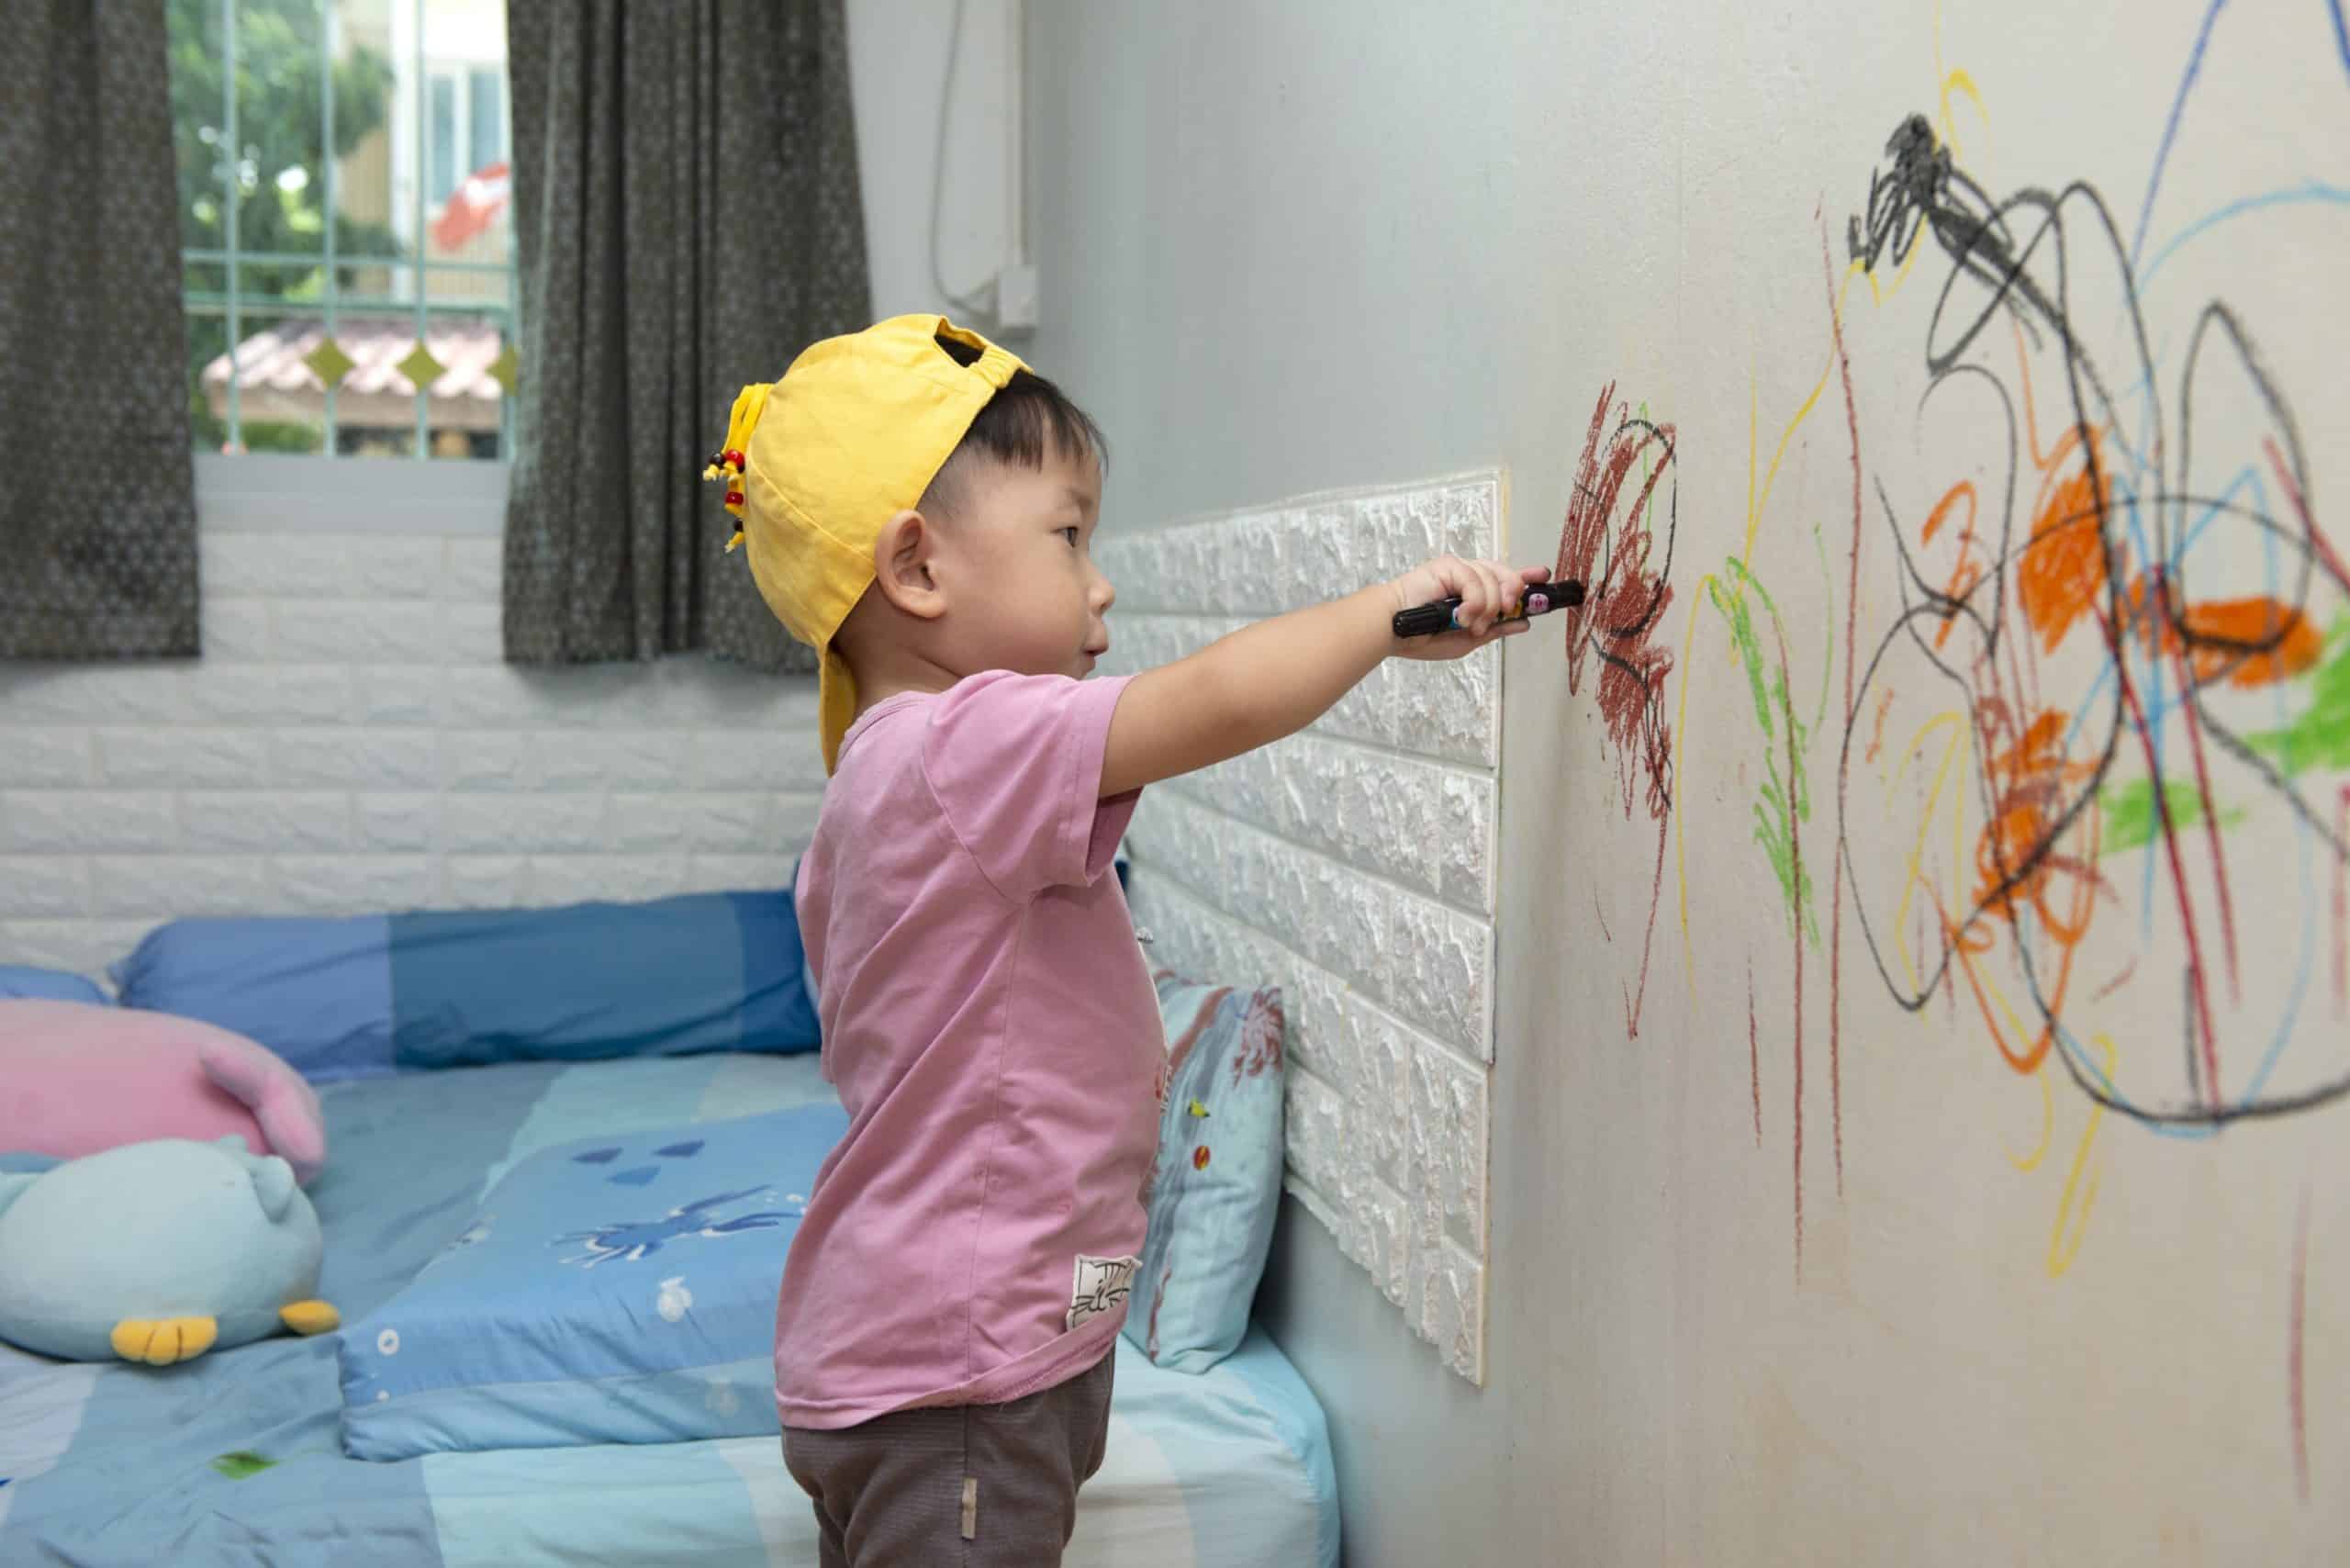 A little boy using crayons to color on a wall.